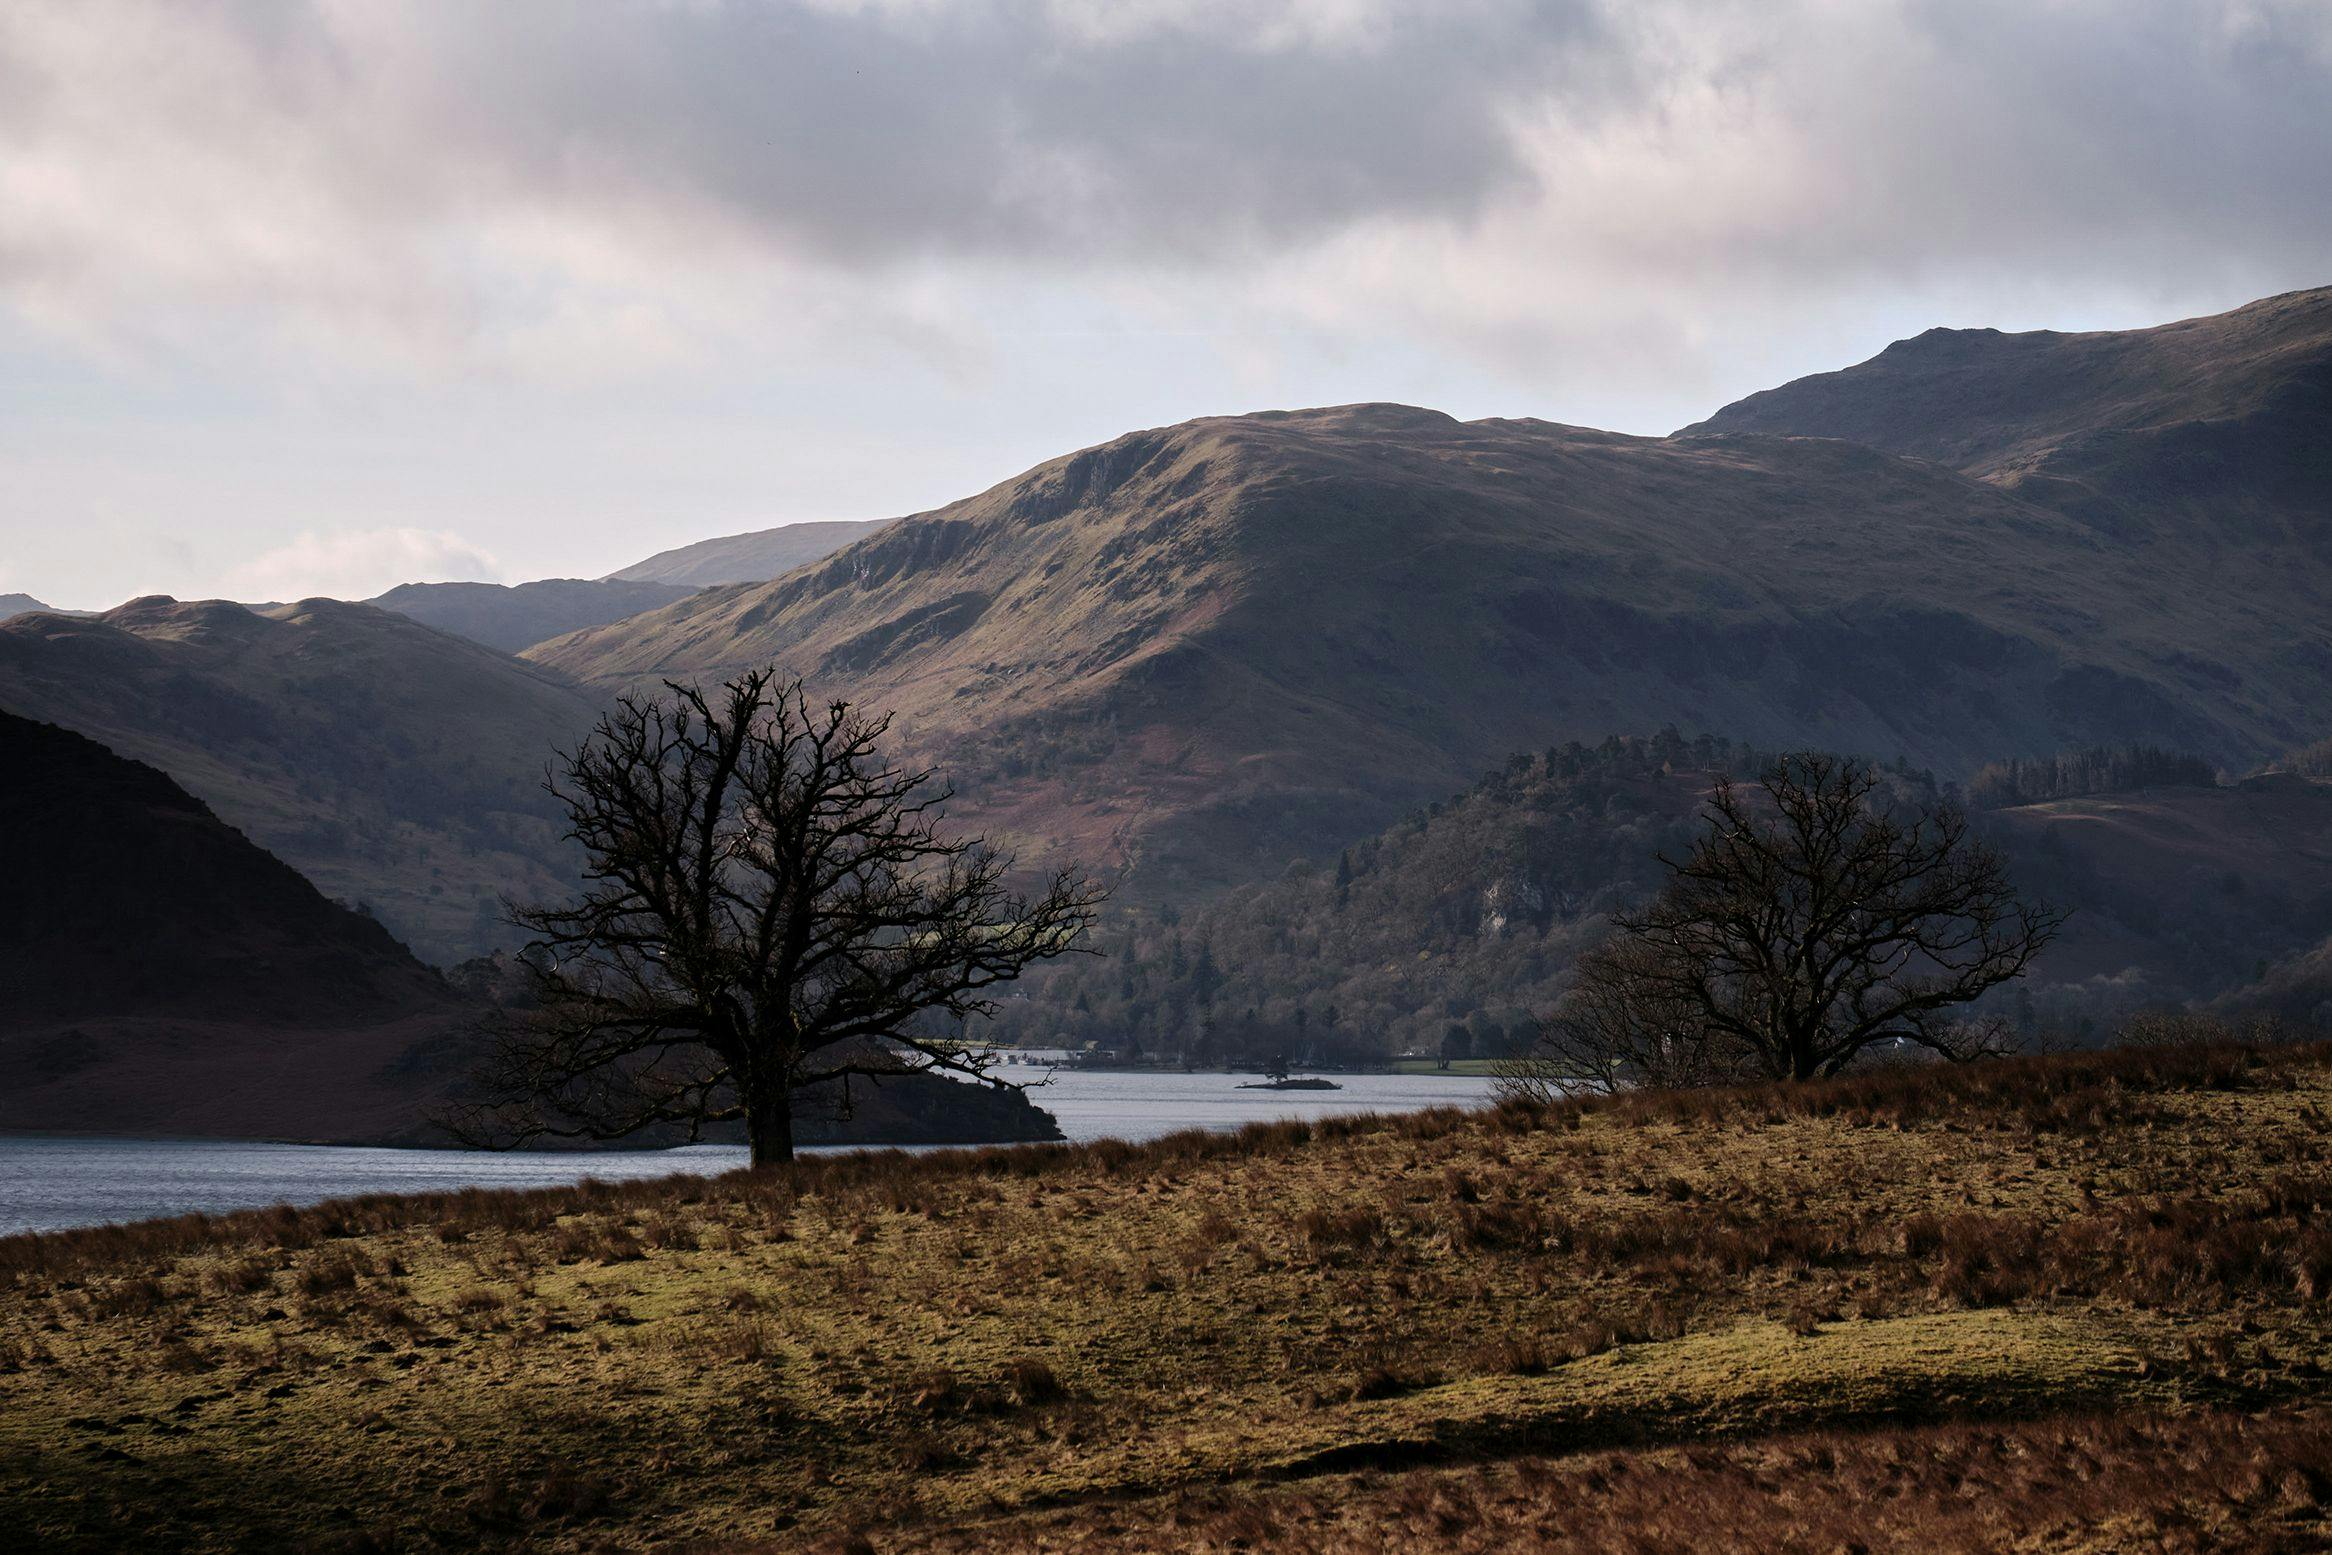 Looking out at the mountains and hills around Ullswater